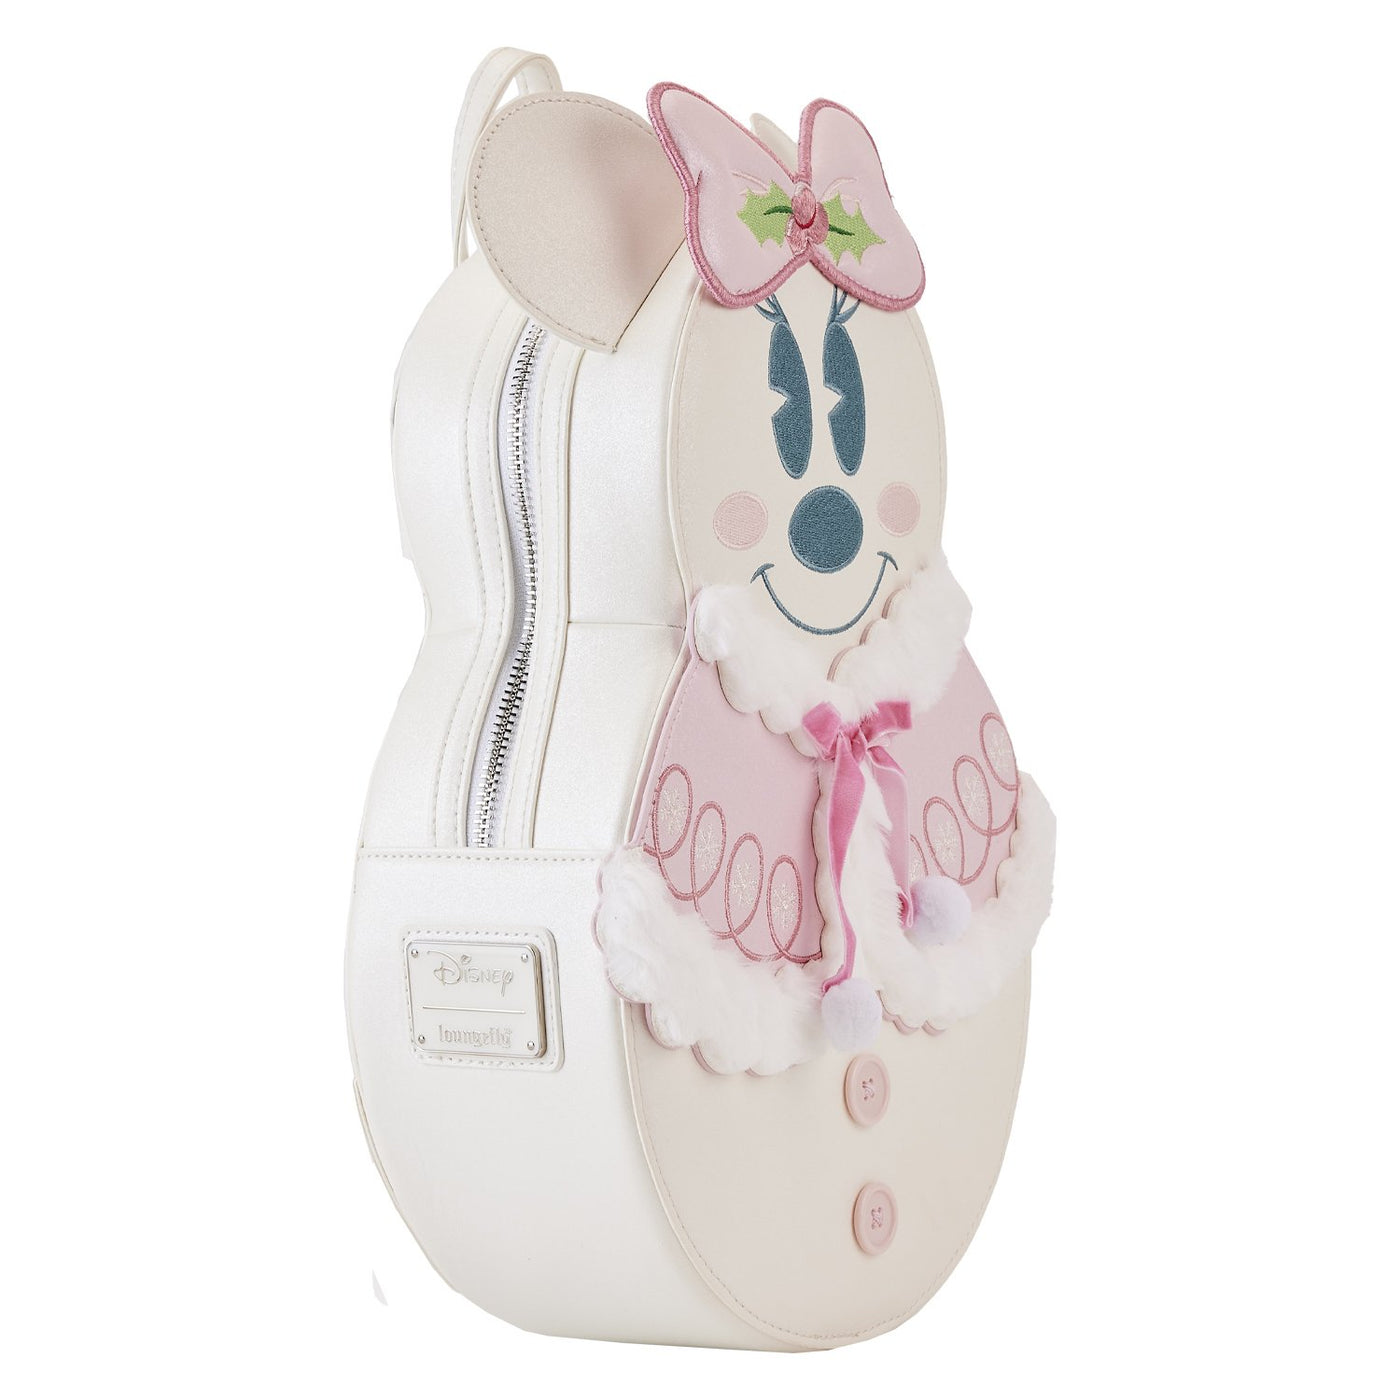 Loungefly Disney Minnie Pastel Figural Snowman Mini Backpack - Side View